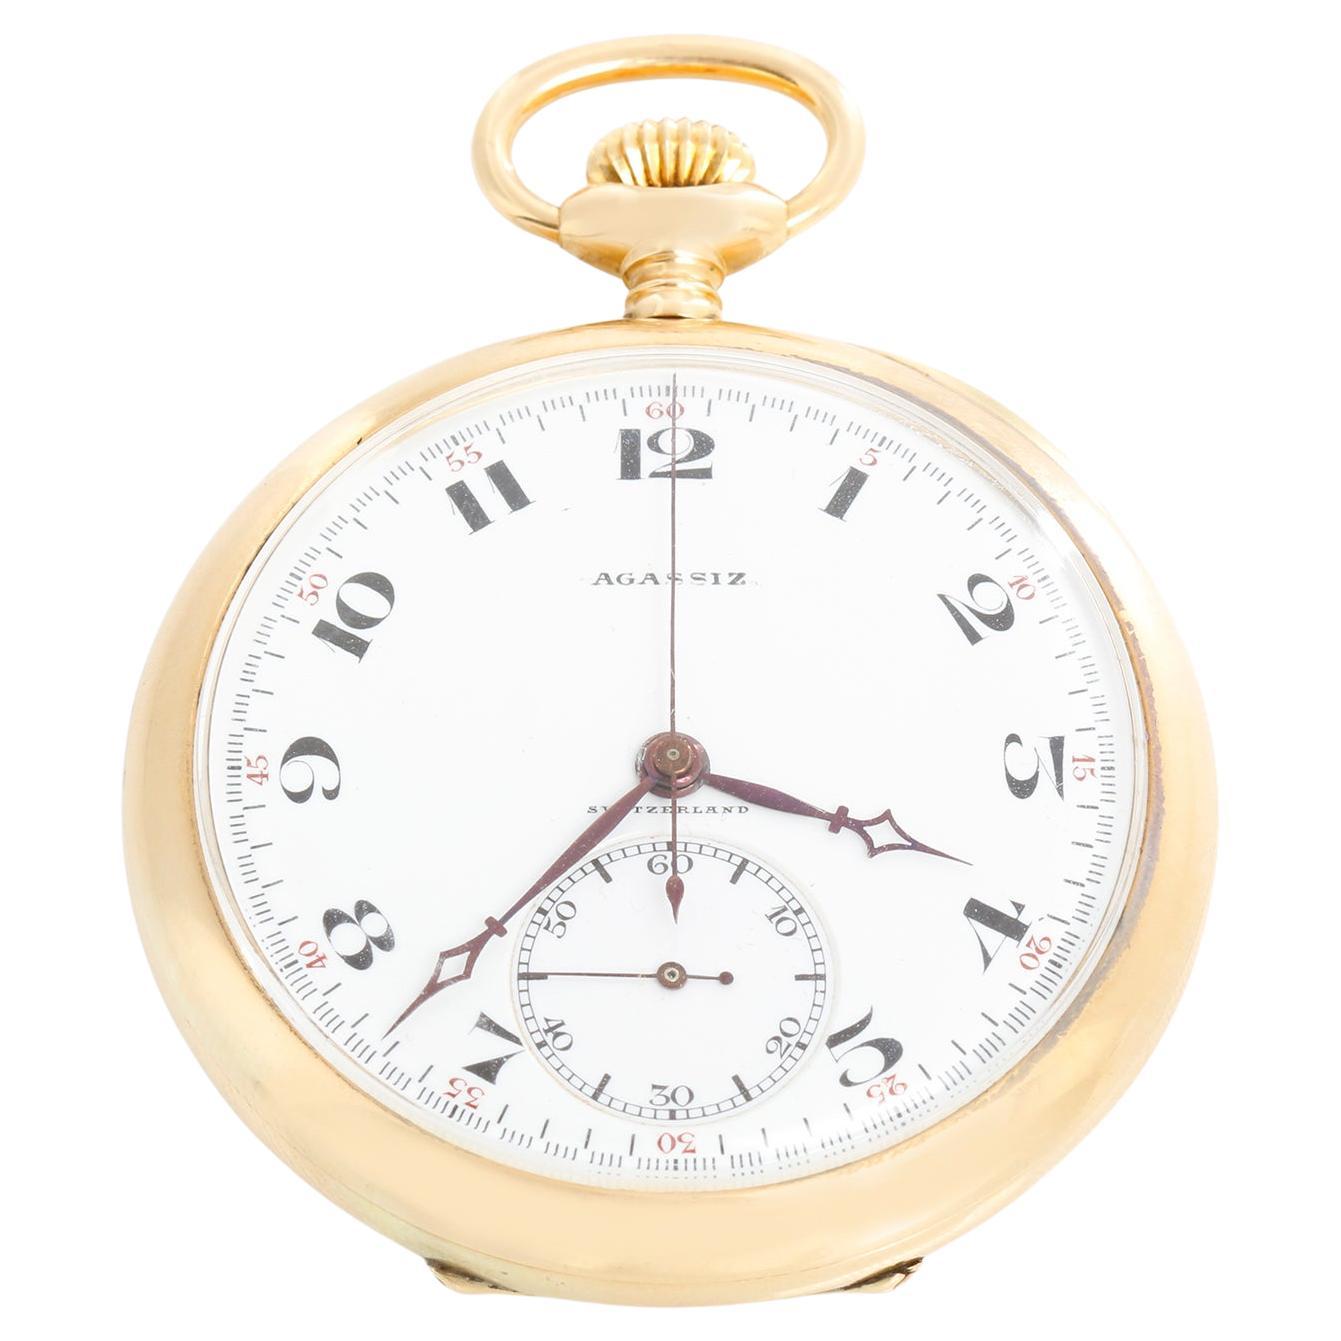 Agassiz Chronograph 14K Yellow Gold Pocket Watch Owned by Wiley Post For Sale